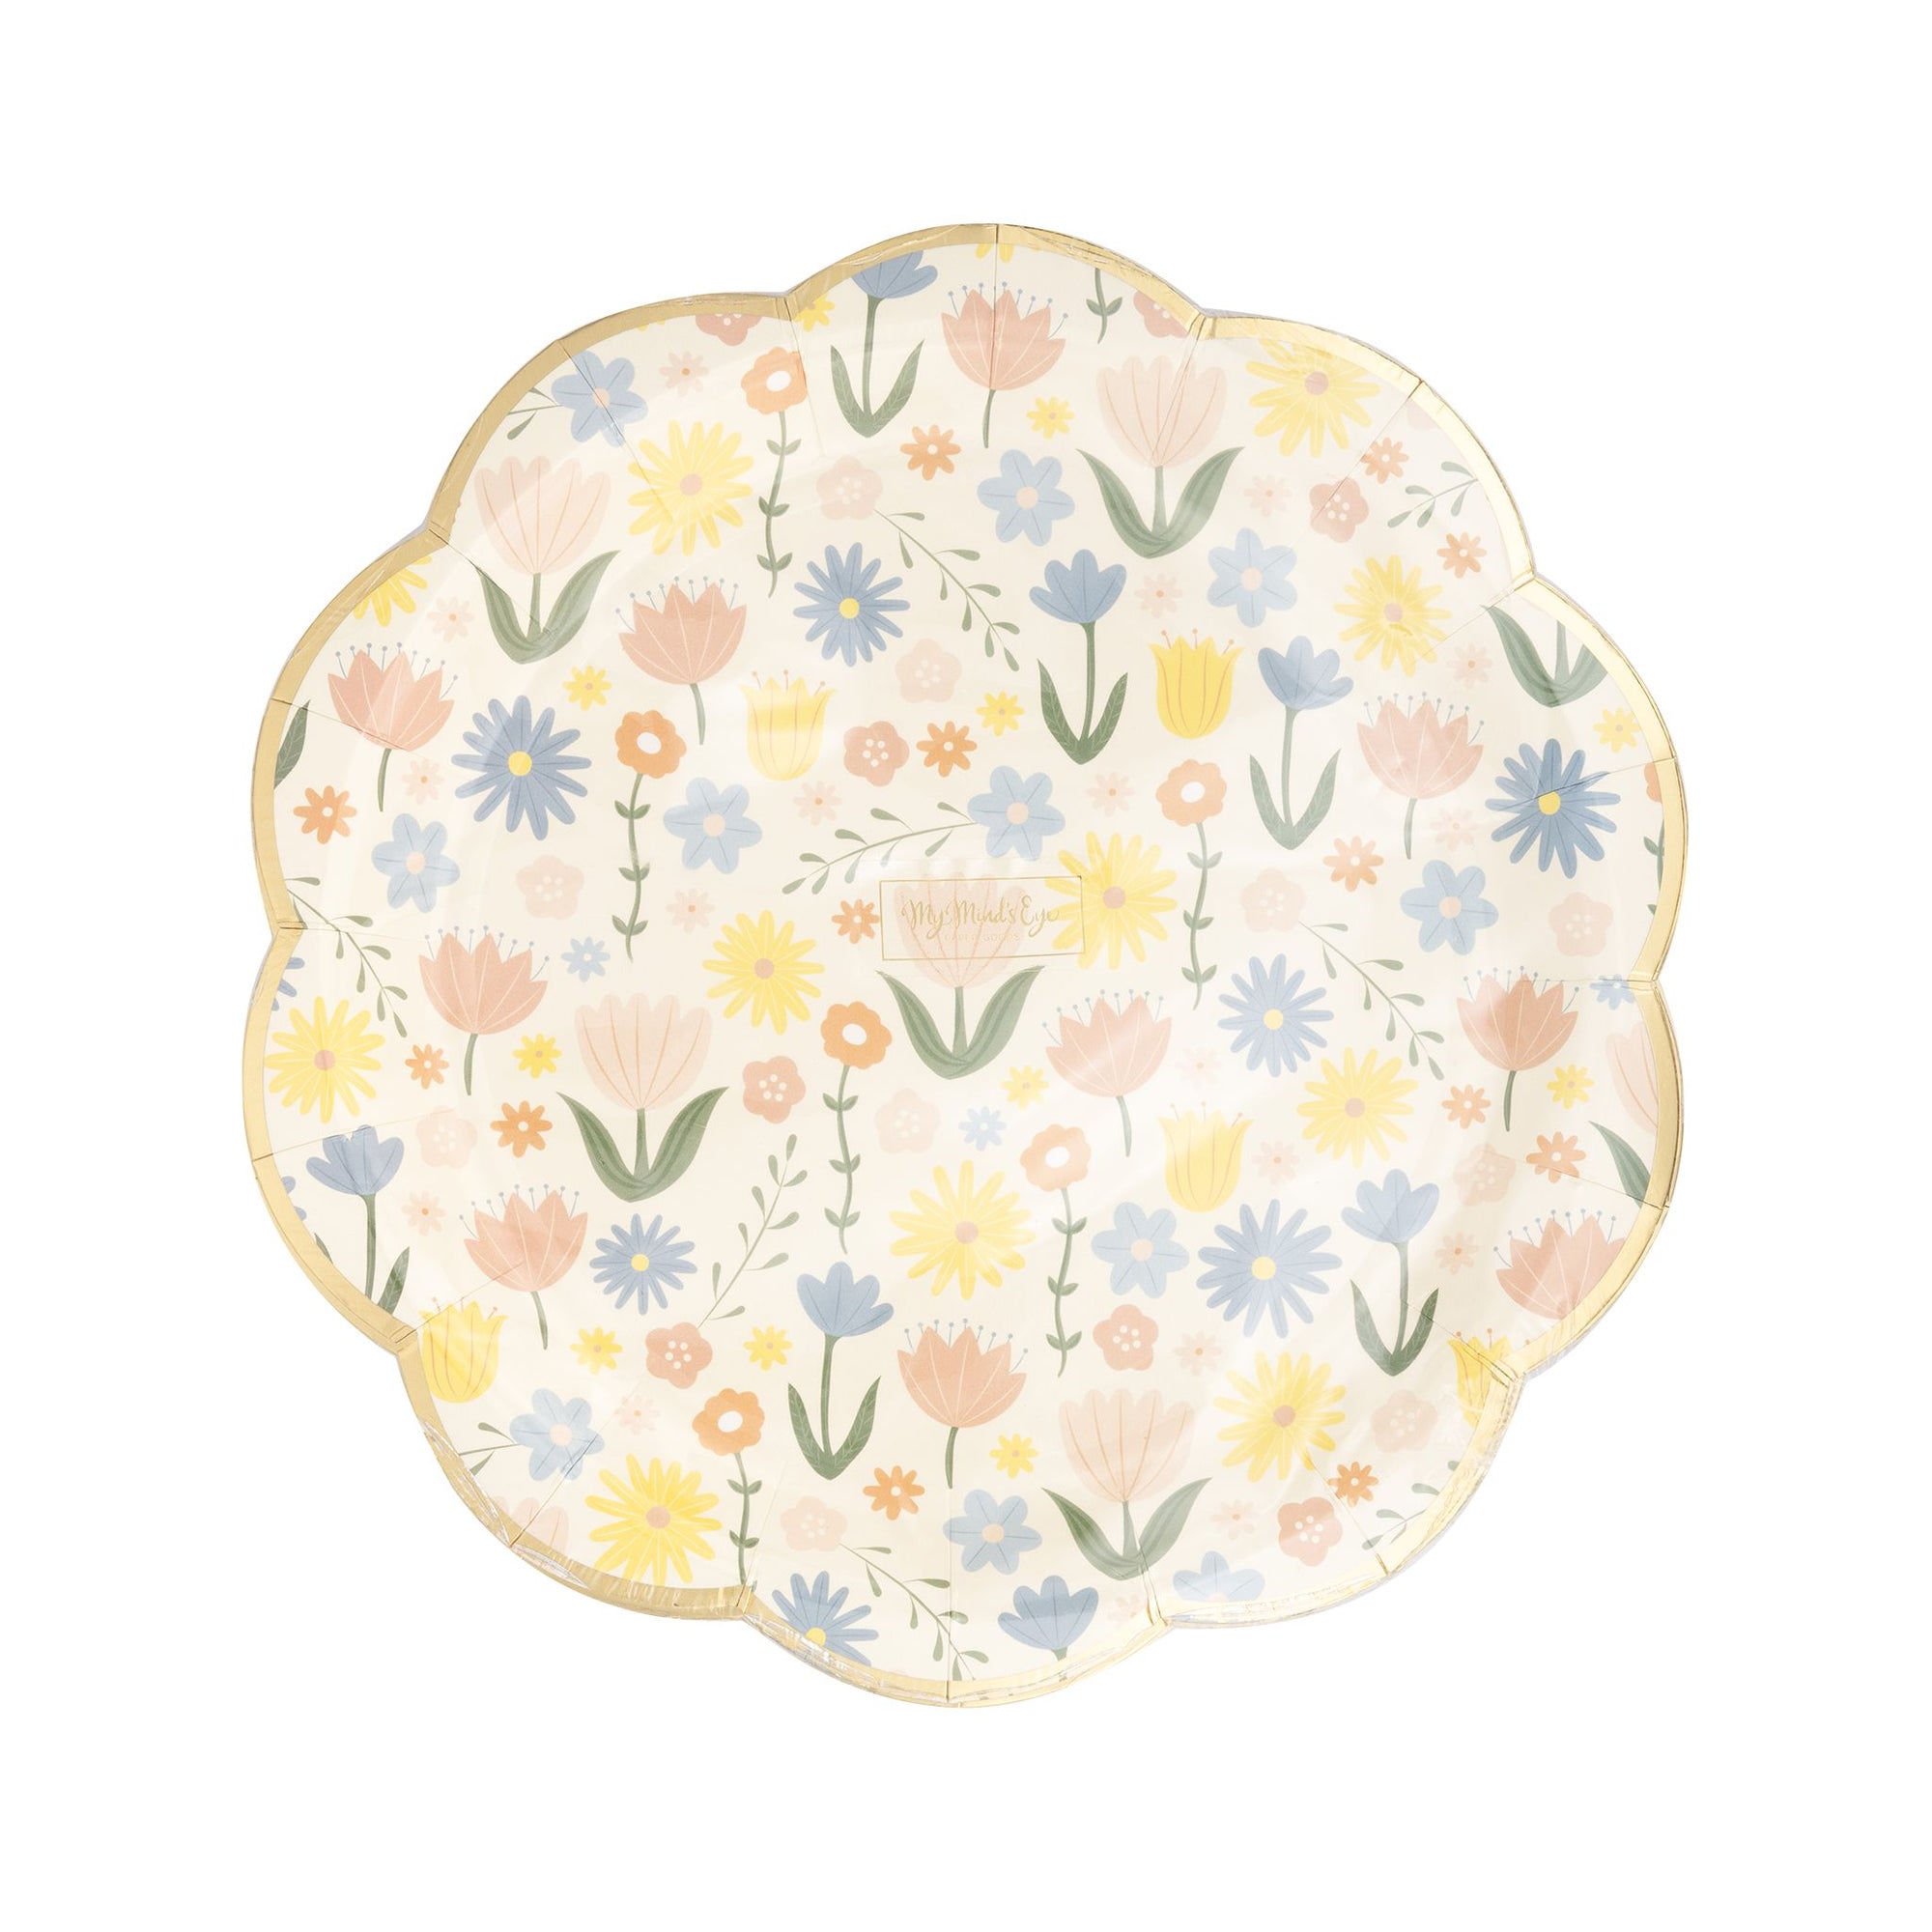 Floral Paper Plates - The Preppy Bunny